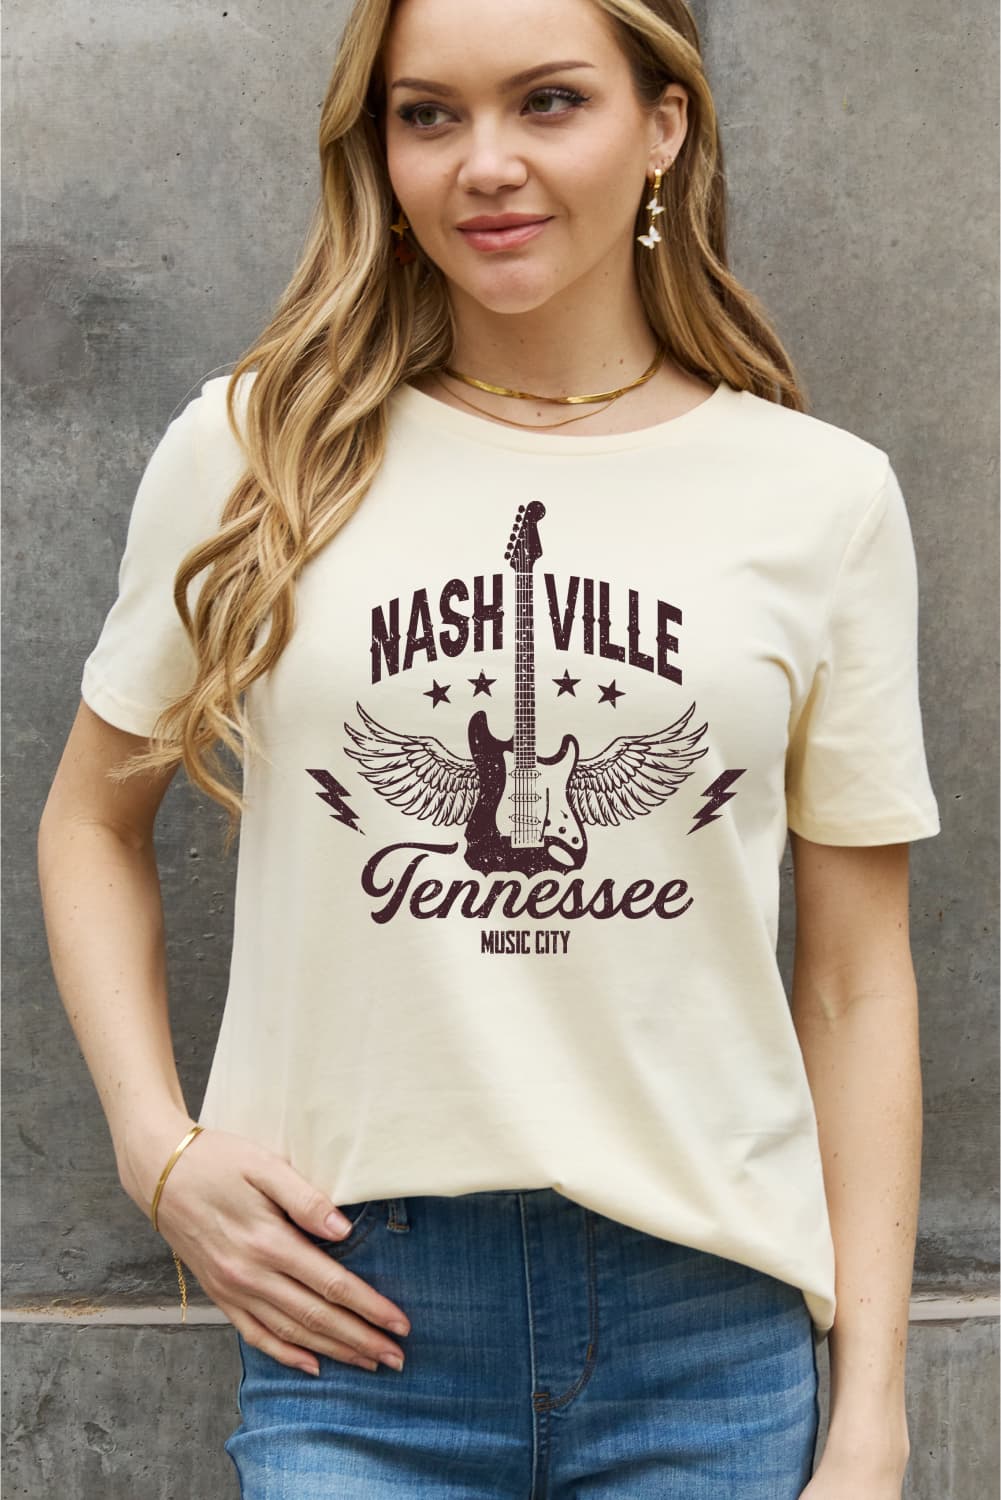 Simply Love Simply Love Full Size NASHVILLE TENNESSEE MUSIC CITY Graphic Cotton Tee